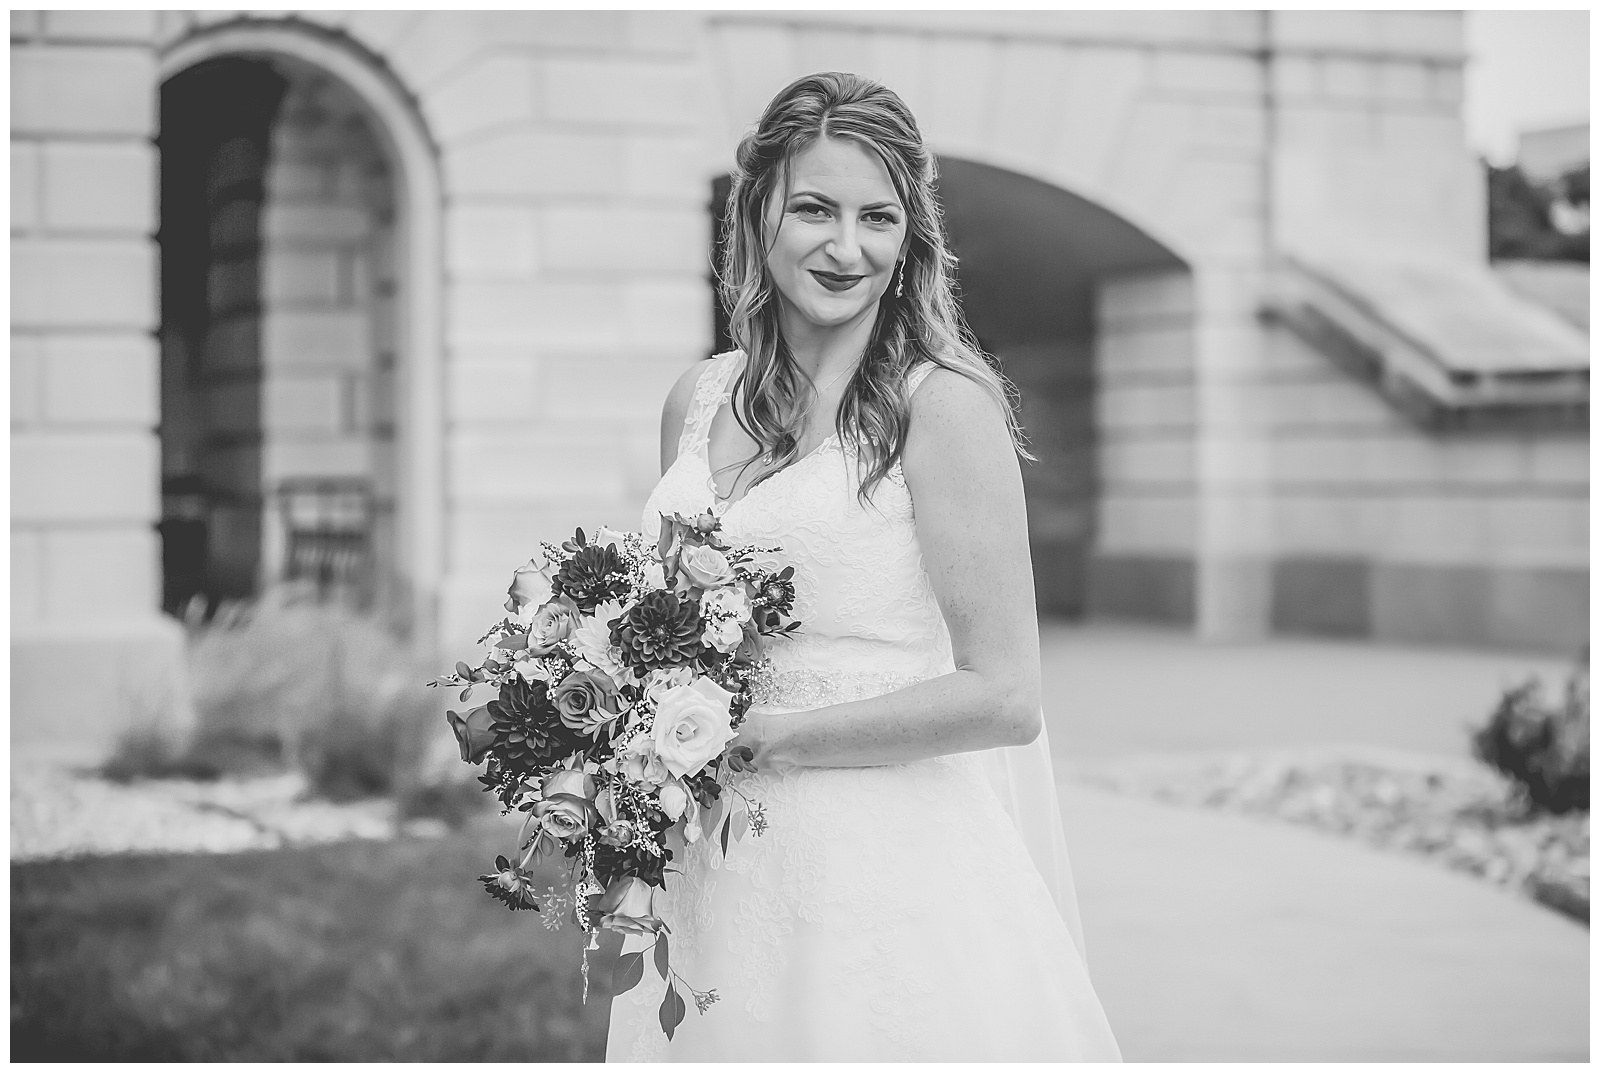 Wedding photography at the Capitol in Topeka, Kansas, by Kansas City wedding photographers Wisdom-Watson Weddings.